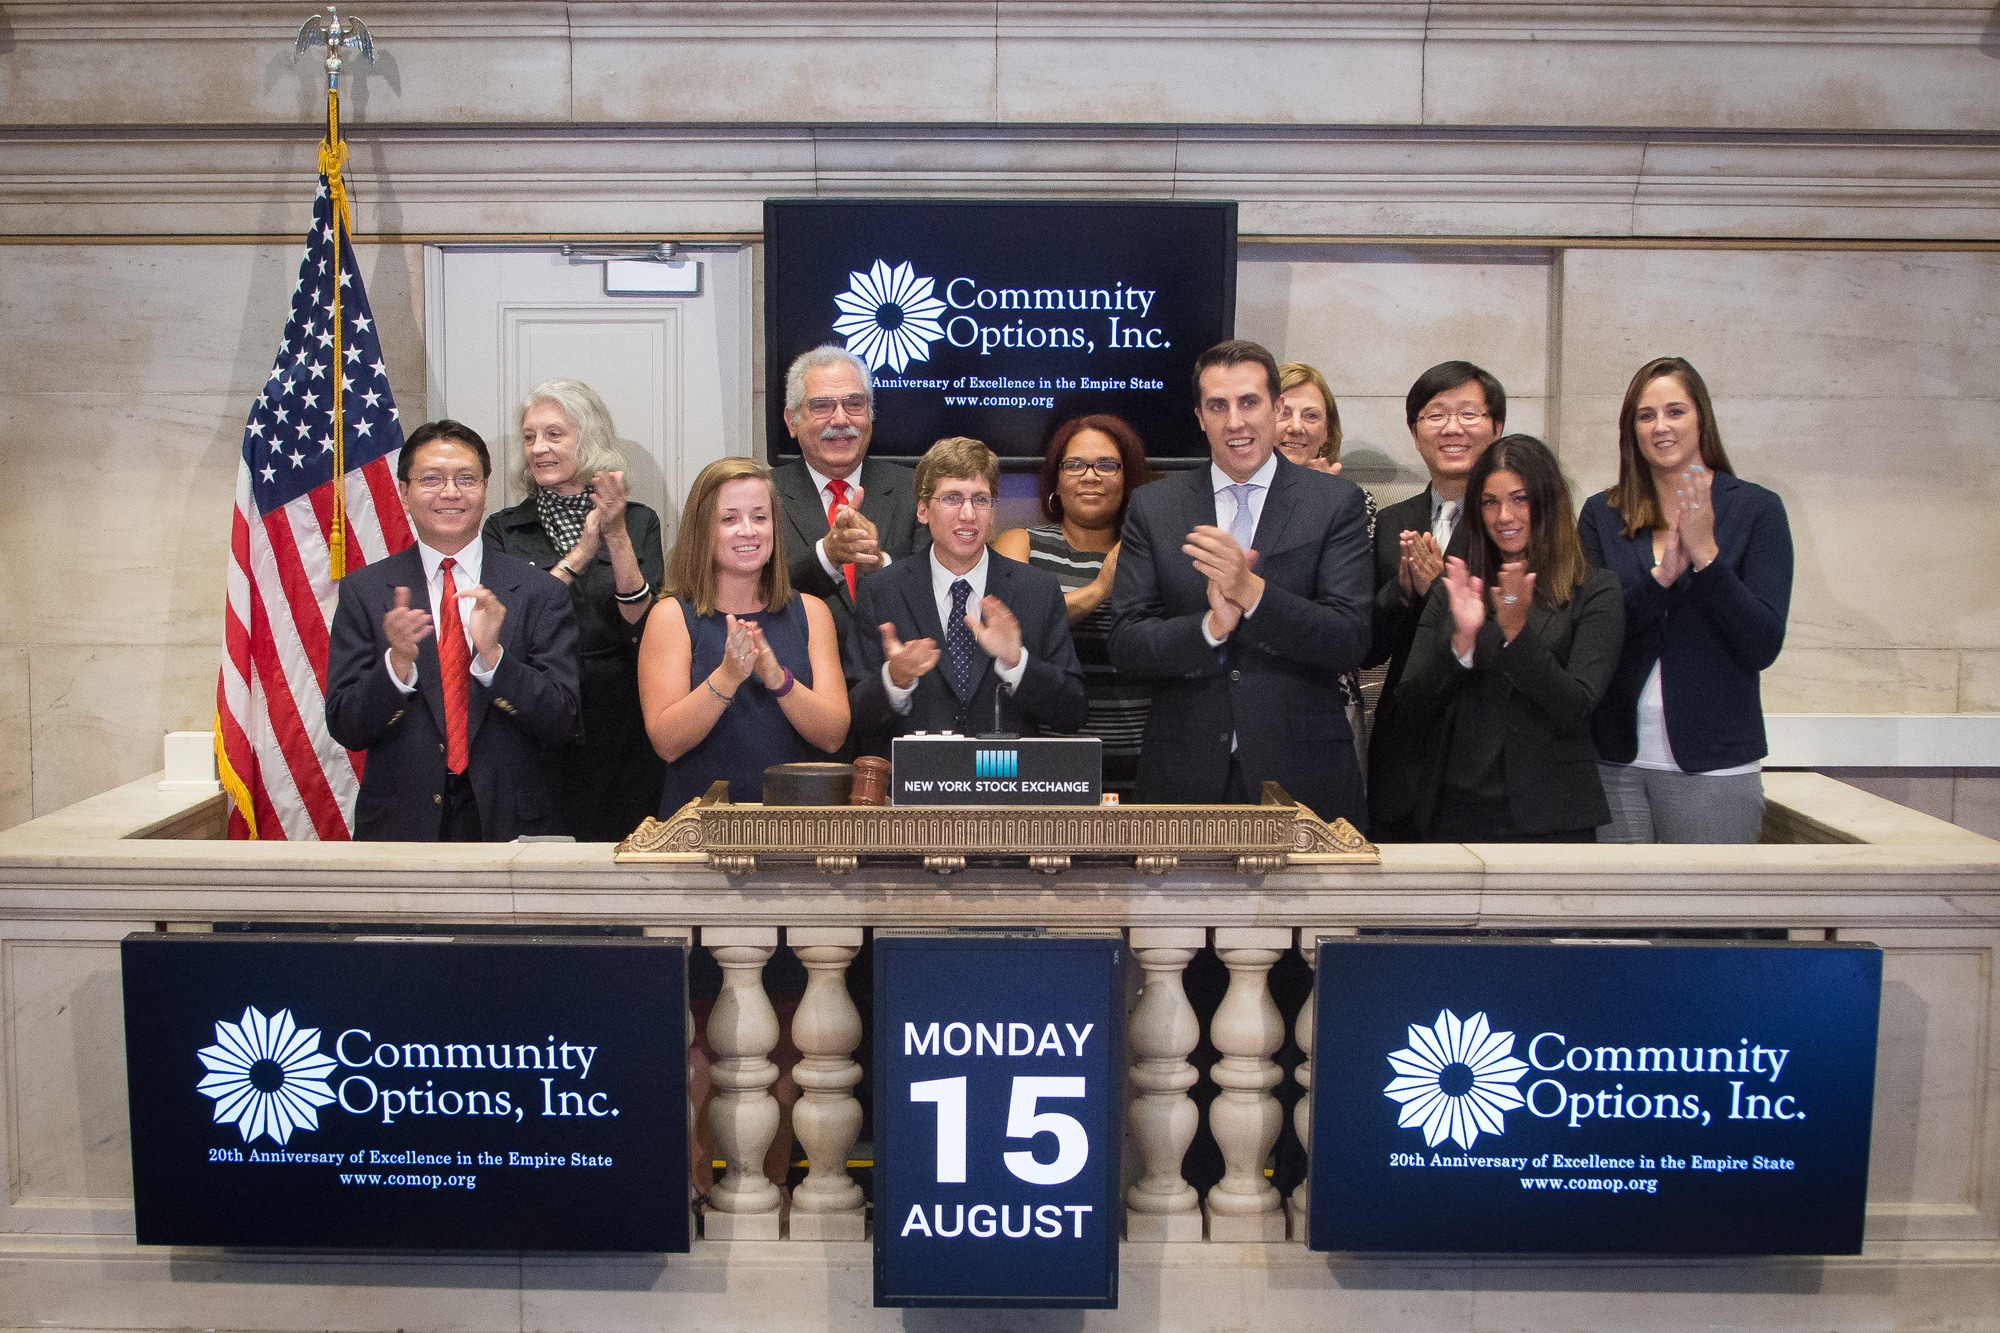 On August 15, 2016, Community Options, rang the Closing Bell at the New York Stock Exchange.